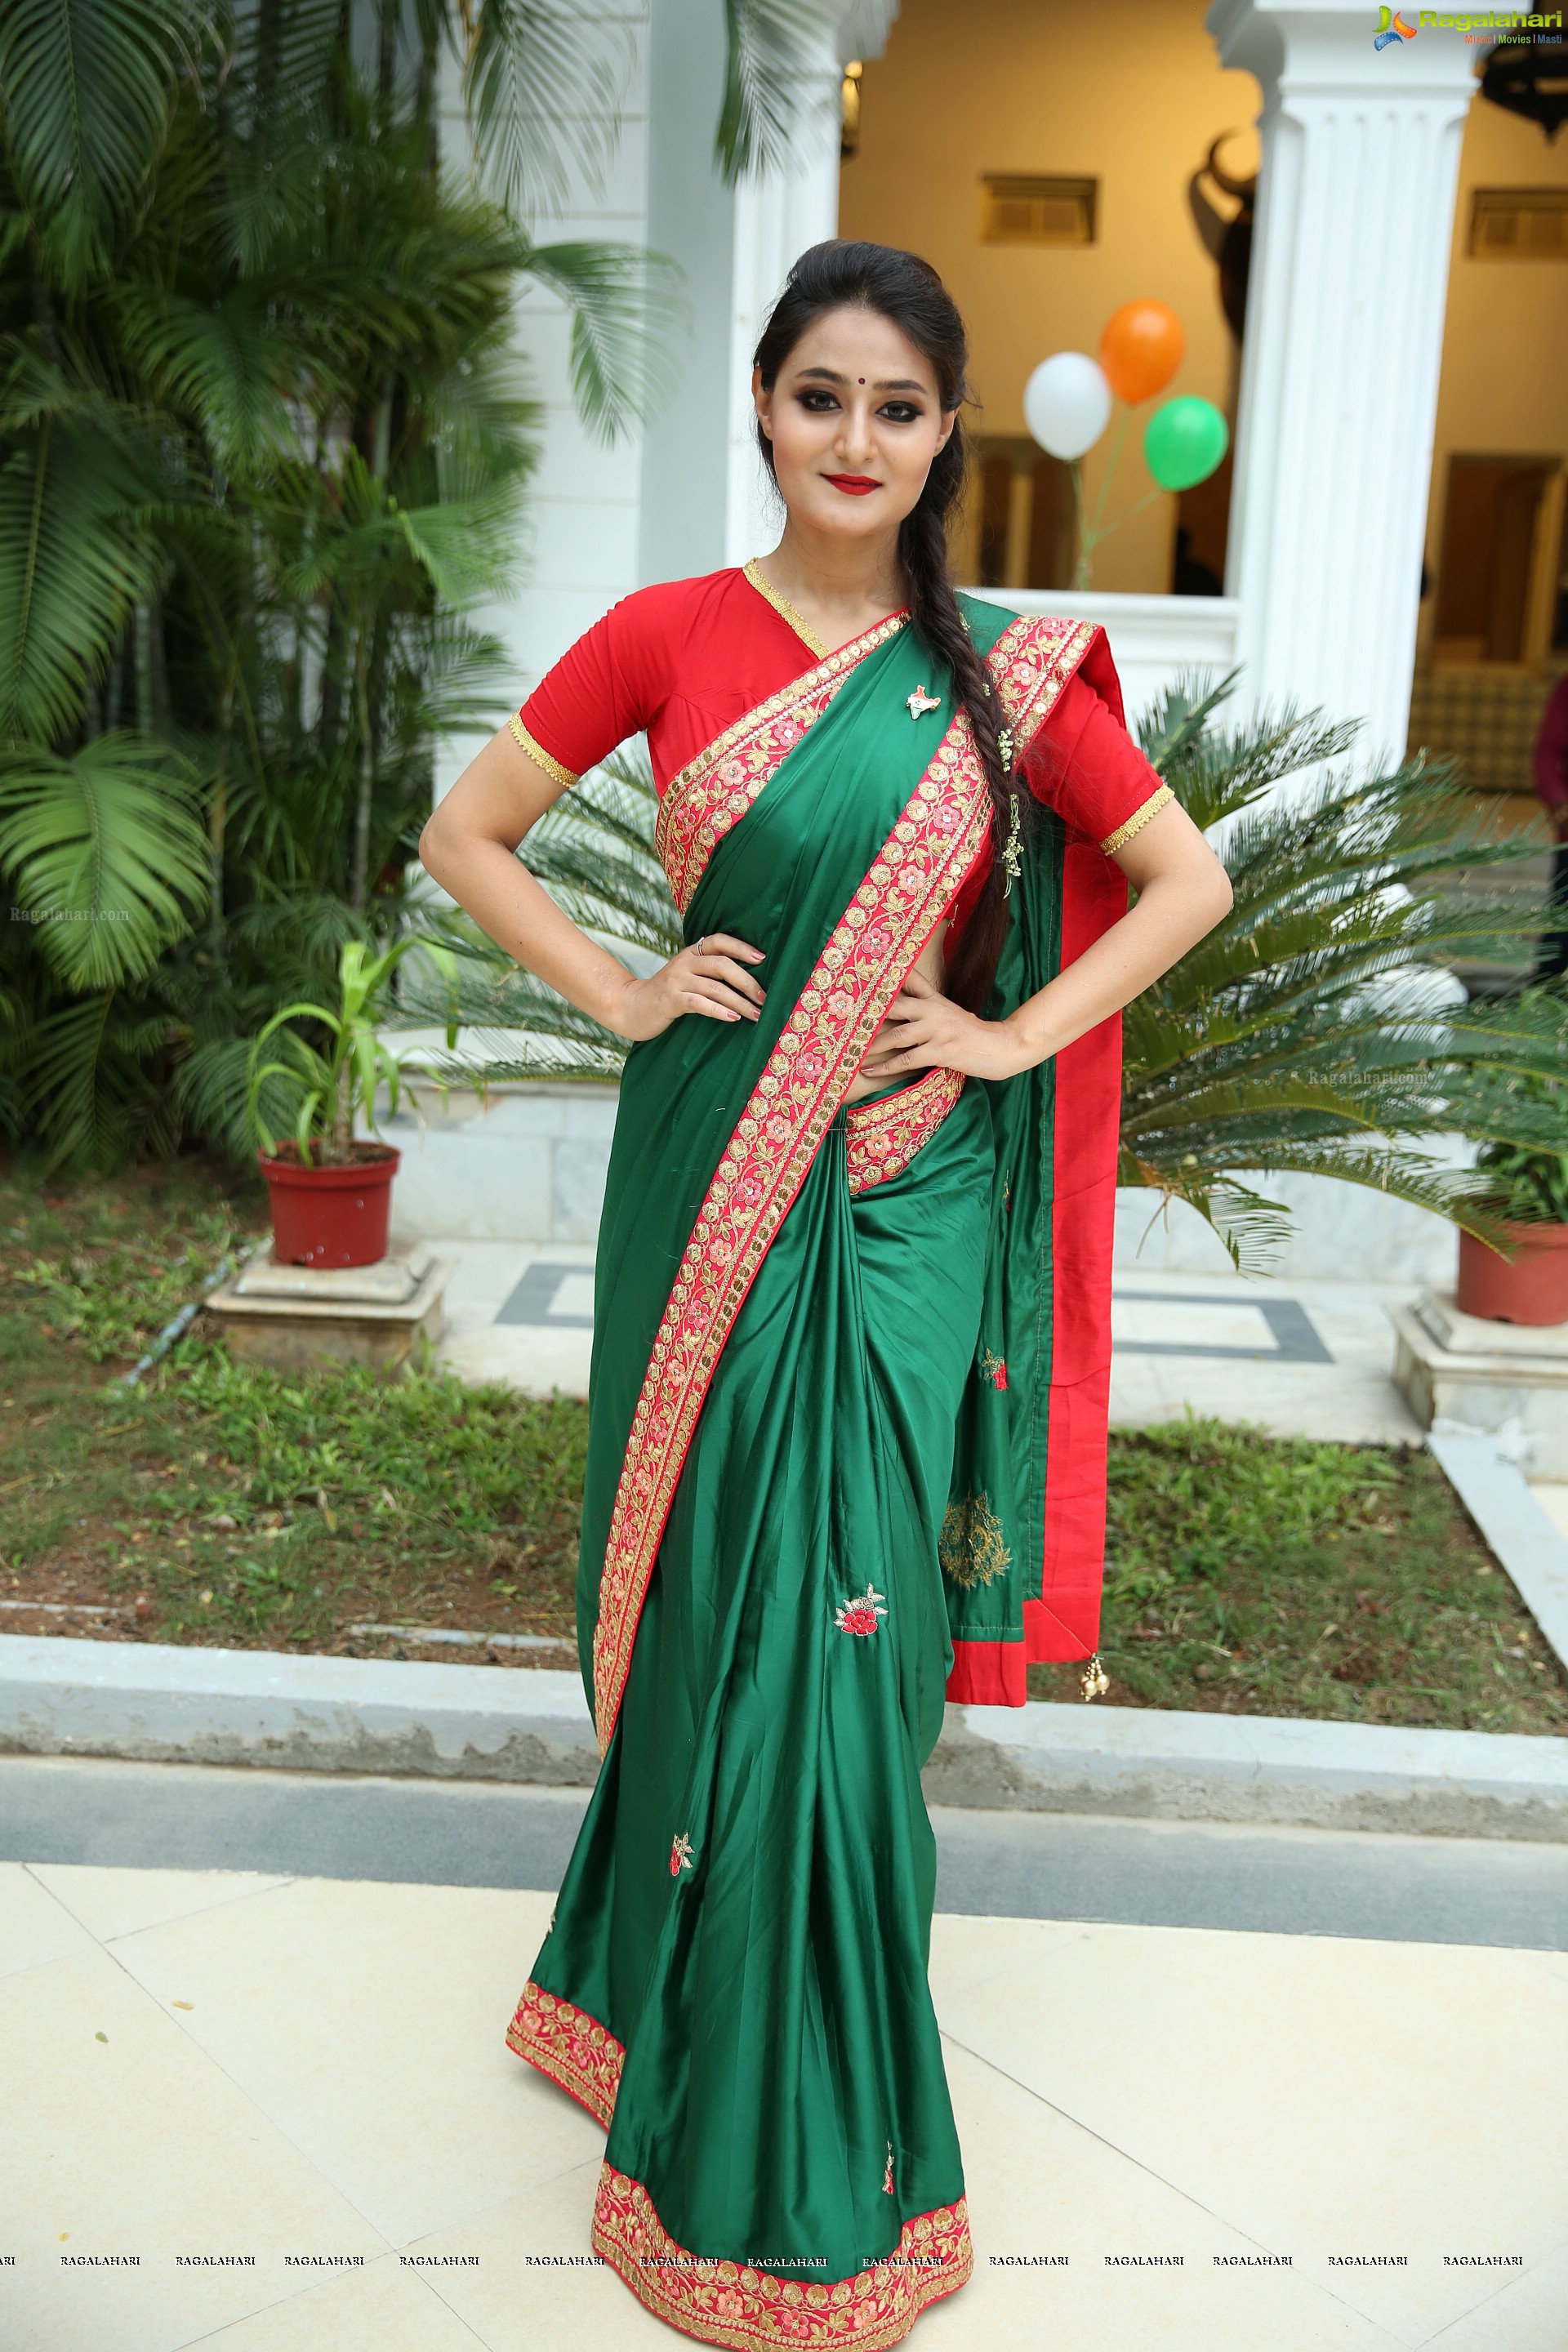 Nilofer Haidry at Country Club Pre-Independence Day Celebrations (High Definition Photos)